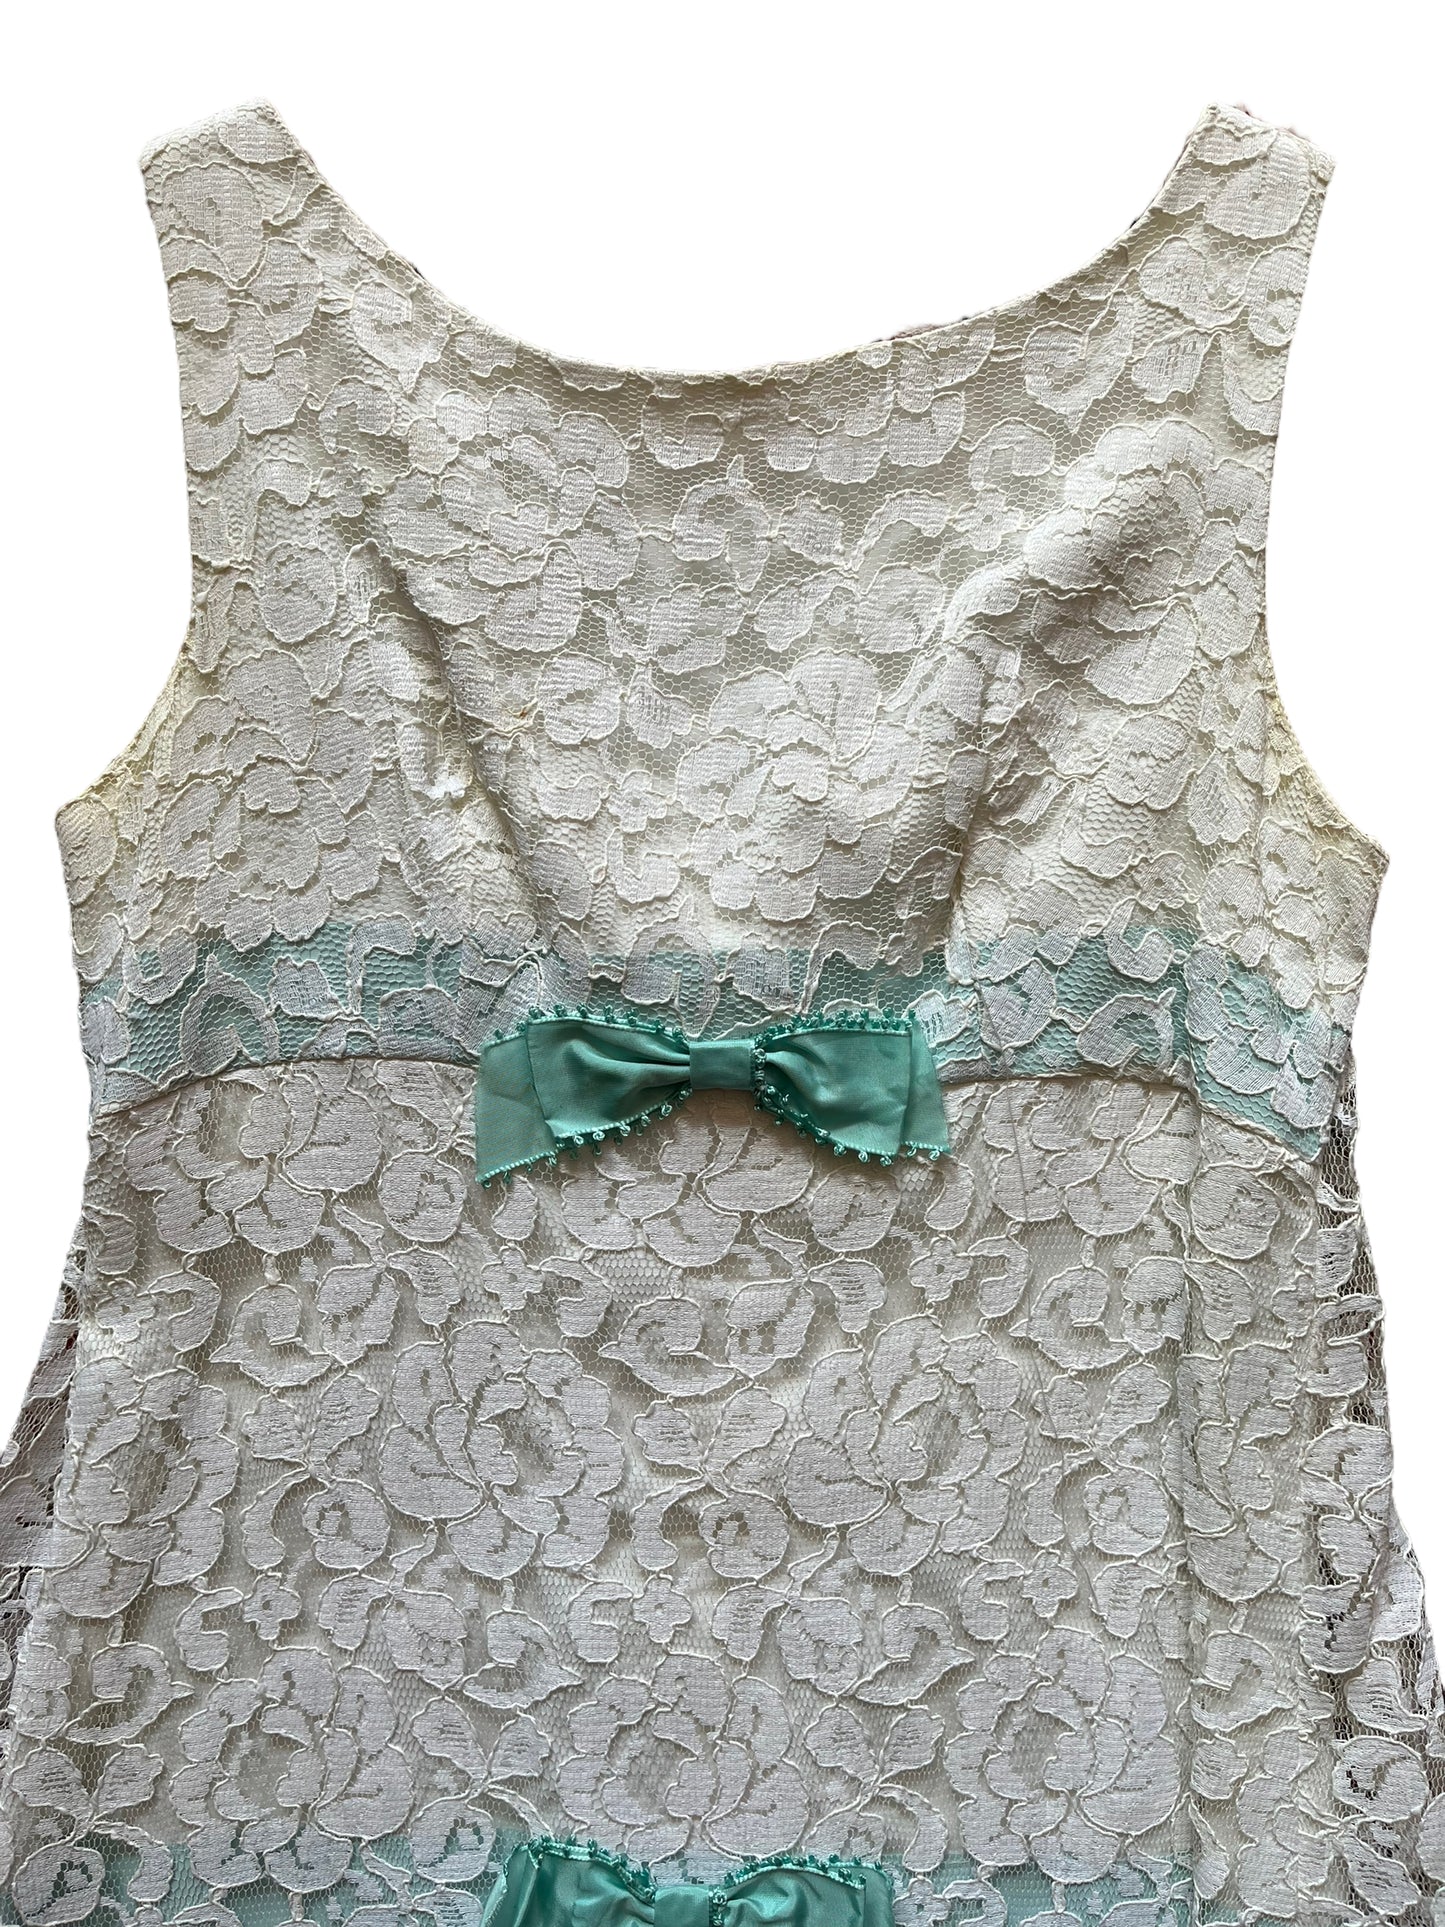 Front top view of Vintage 1960s Lace Dress with Blue Bows